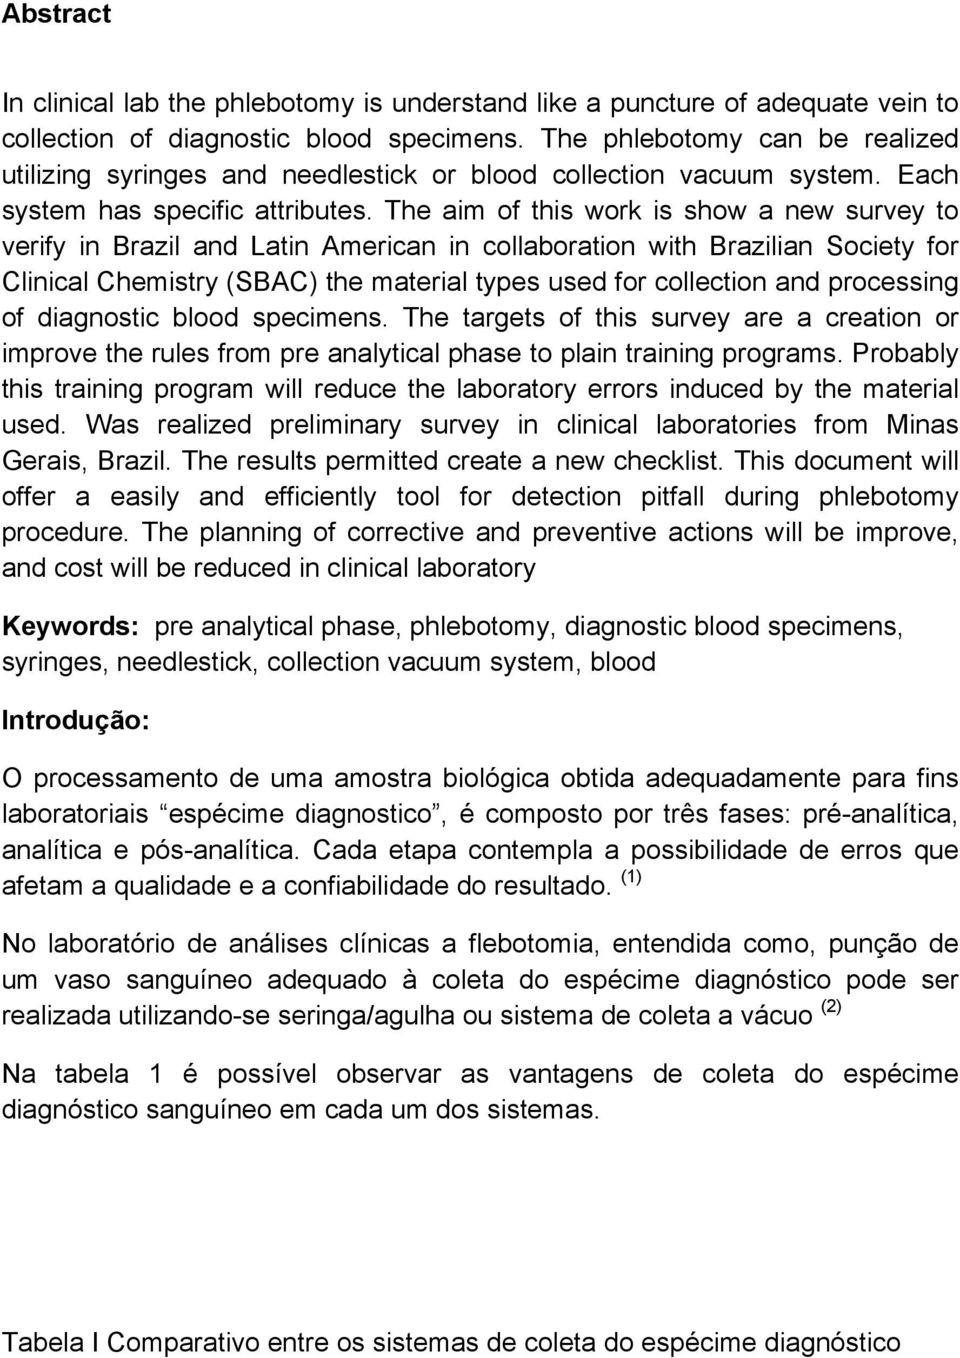 The aim of this work is show a new survey to verify in Brazil and Latin American in collaboration with Brazilian Society for Clinical Chemistry (SBAC) the material types used for collection and